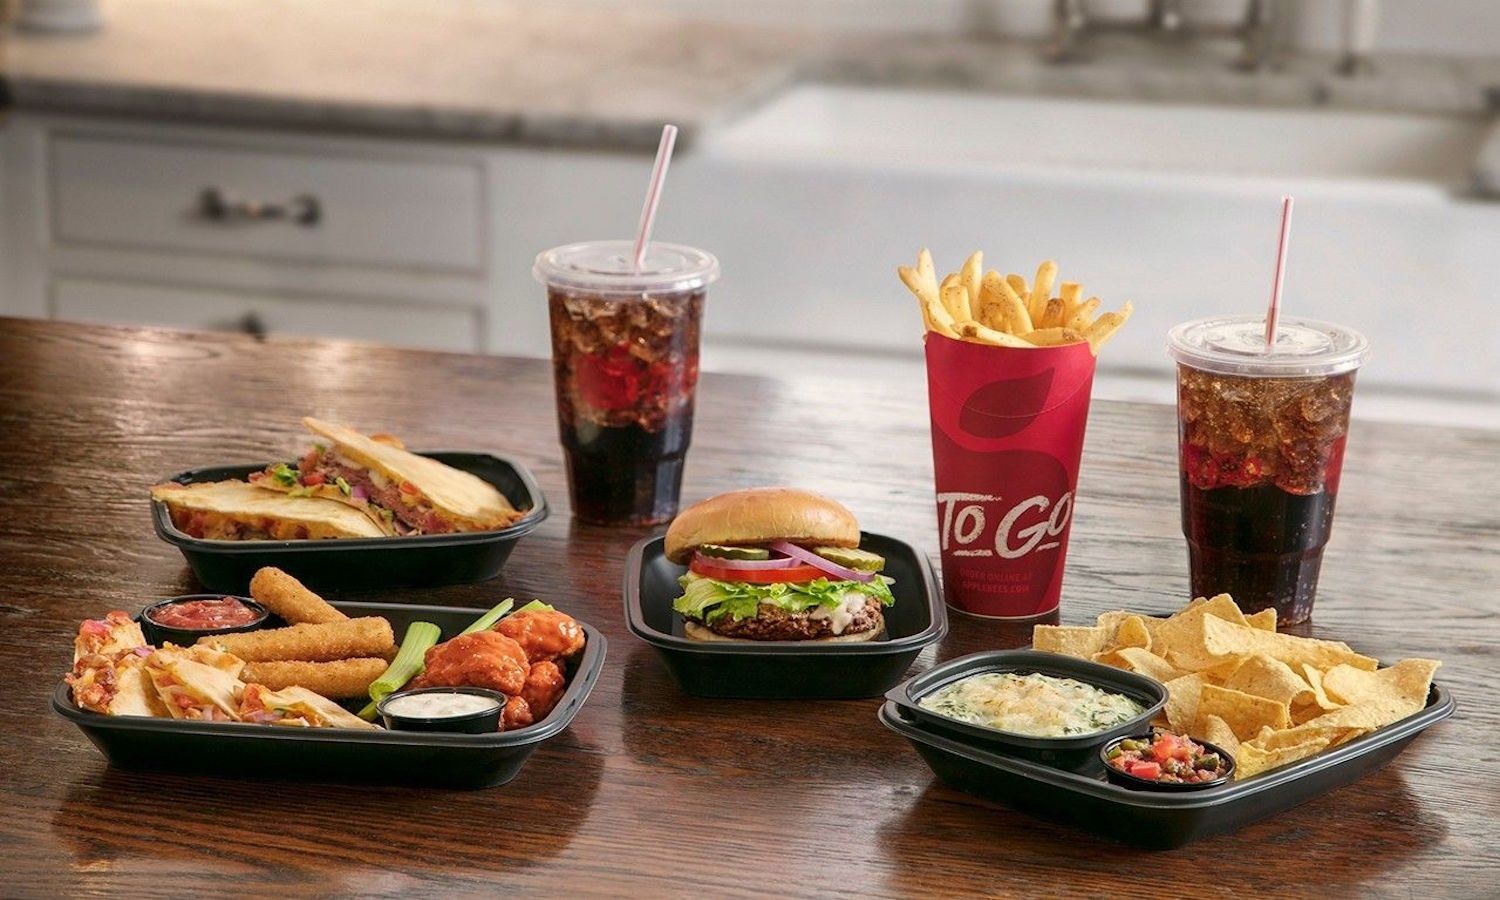 Applebee’s Takeout Near You in Tampa